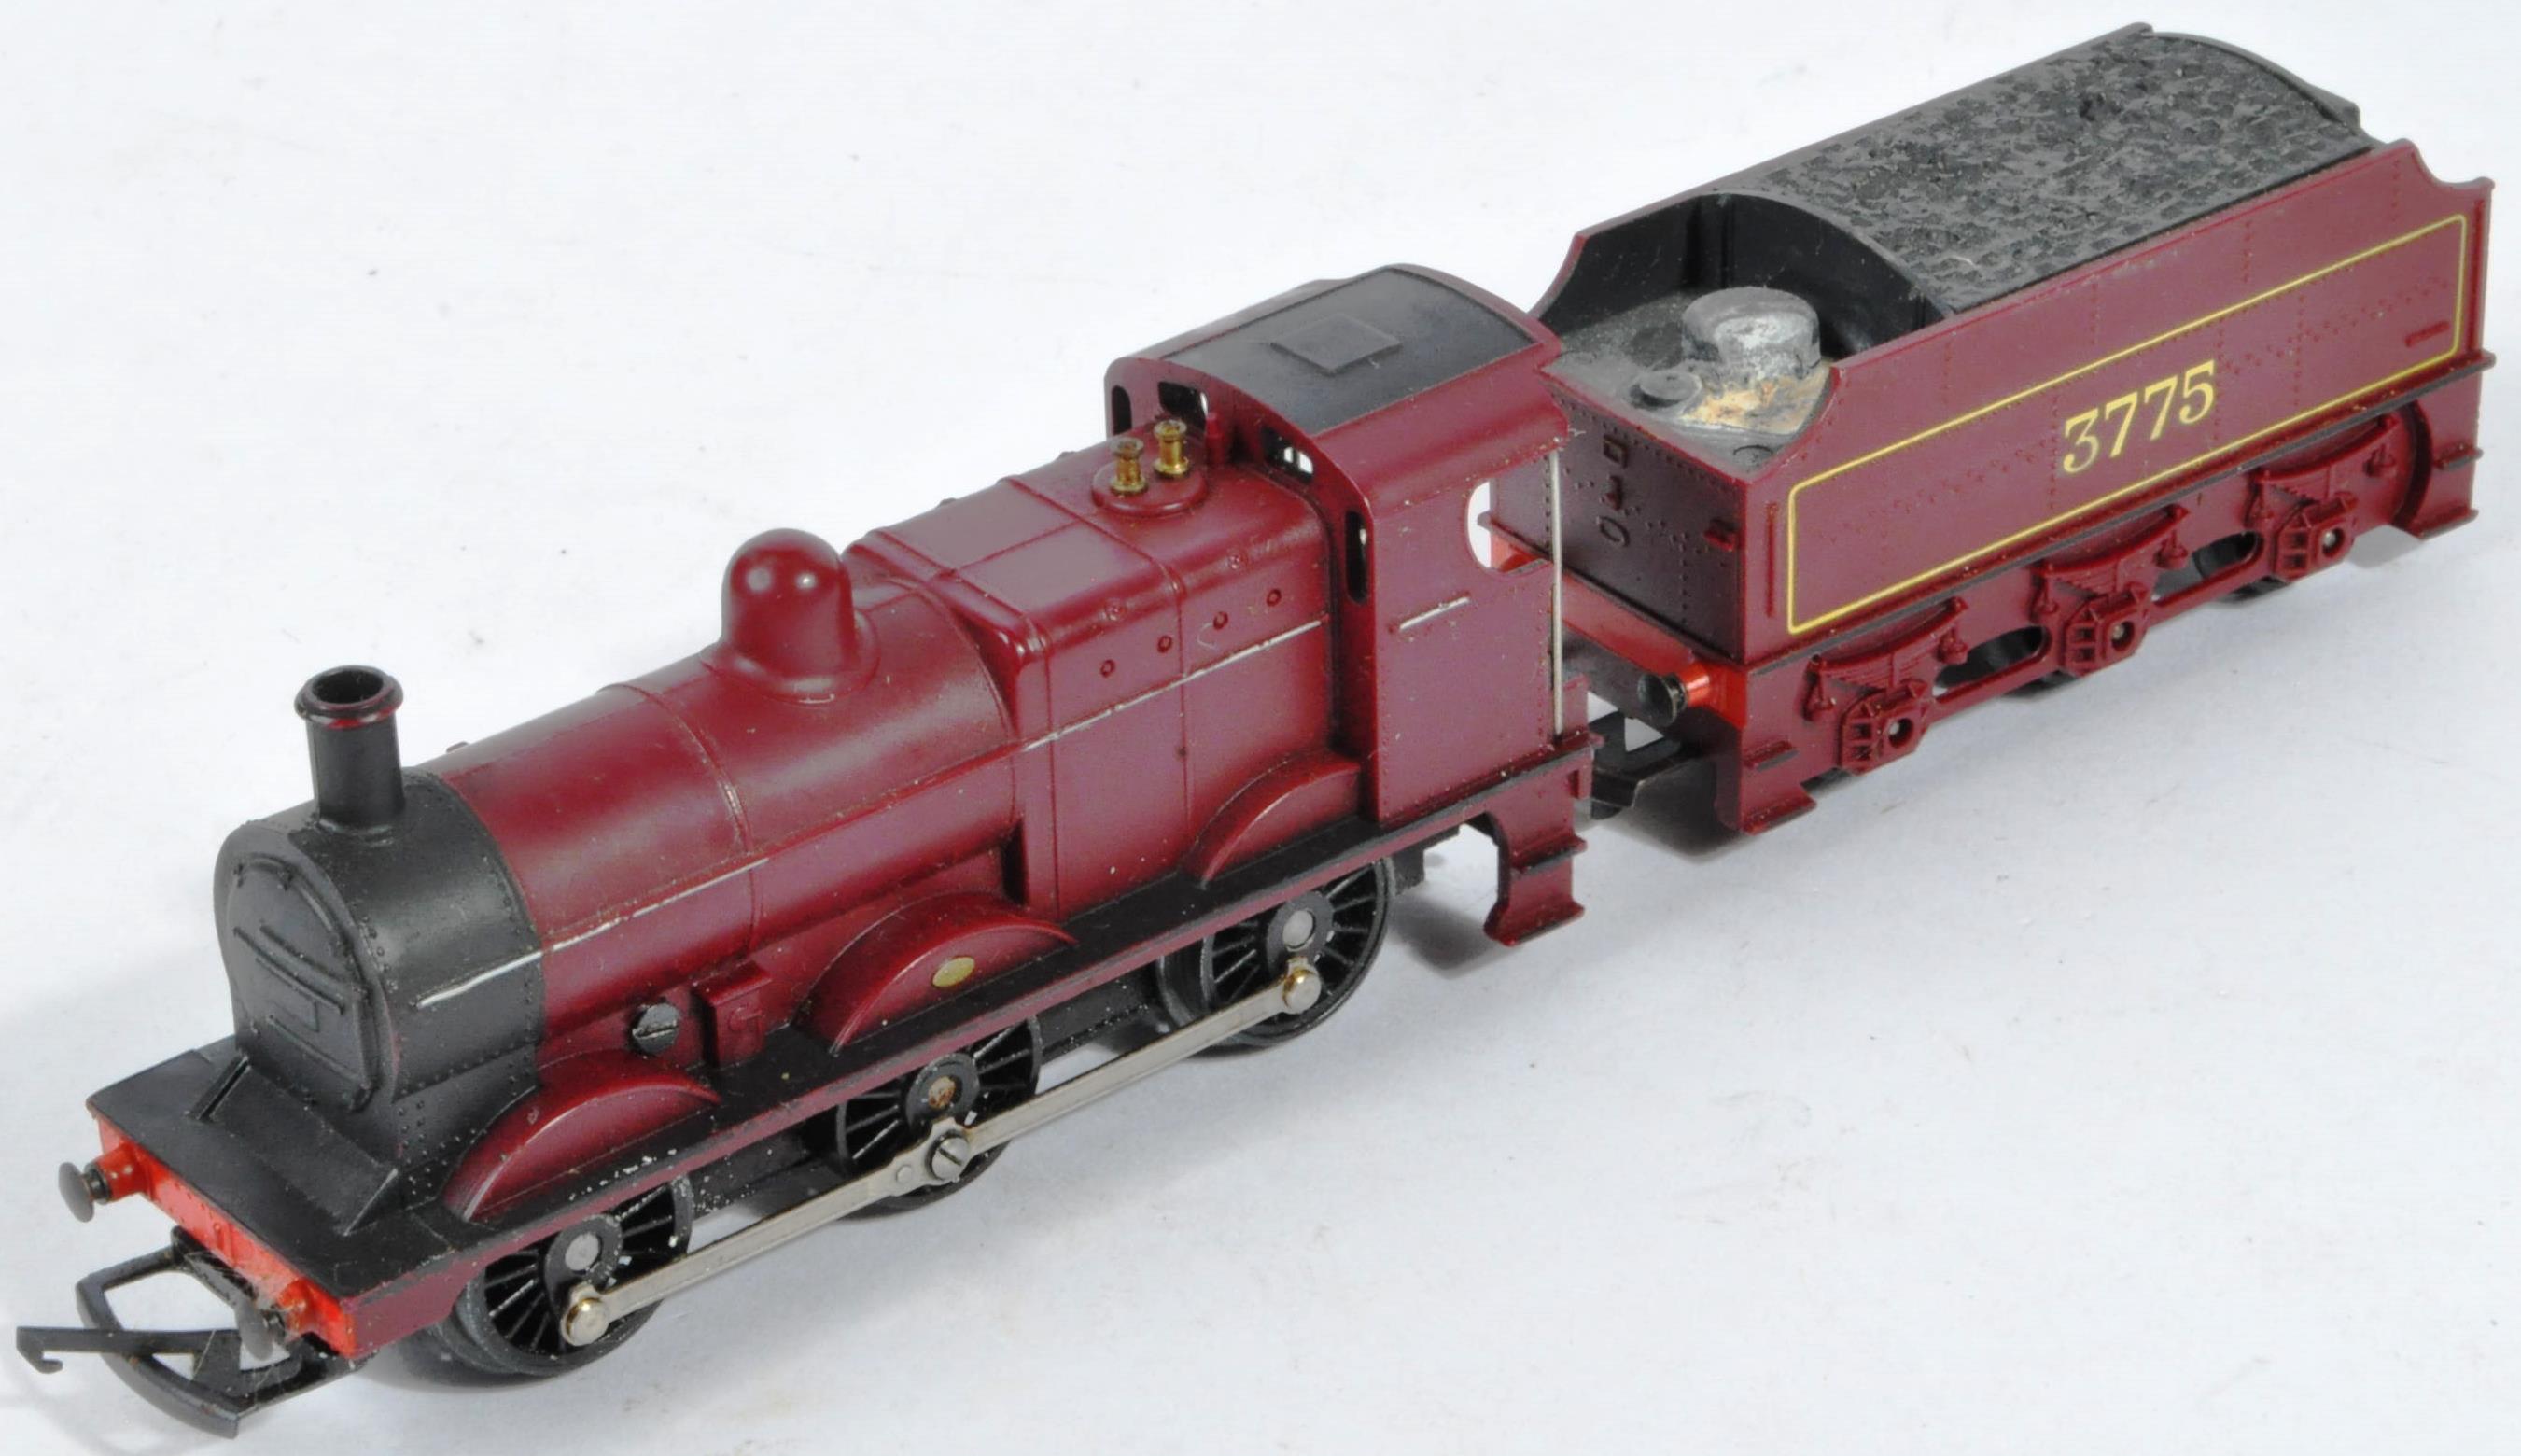 COLLECTION OF HORNBY / TRIANG TRAIN SET LOCOMOTIVE ENGINES - Image 6 of 8